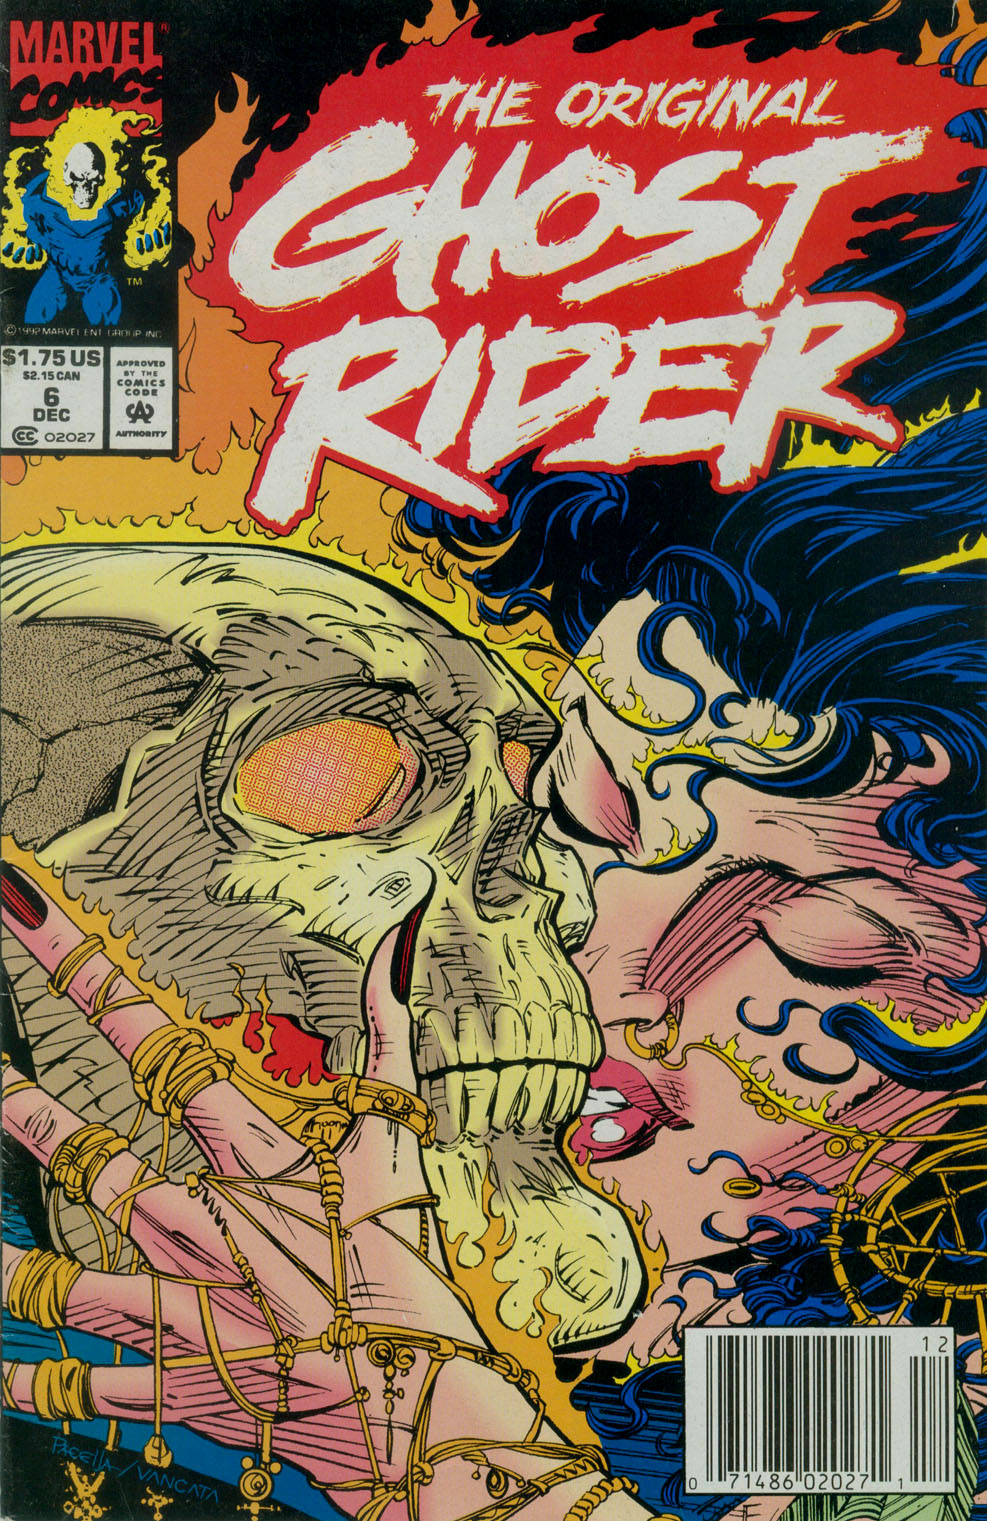 Read online The Original Ghost Rider comic -  Issue #6 - 1